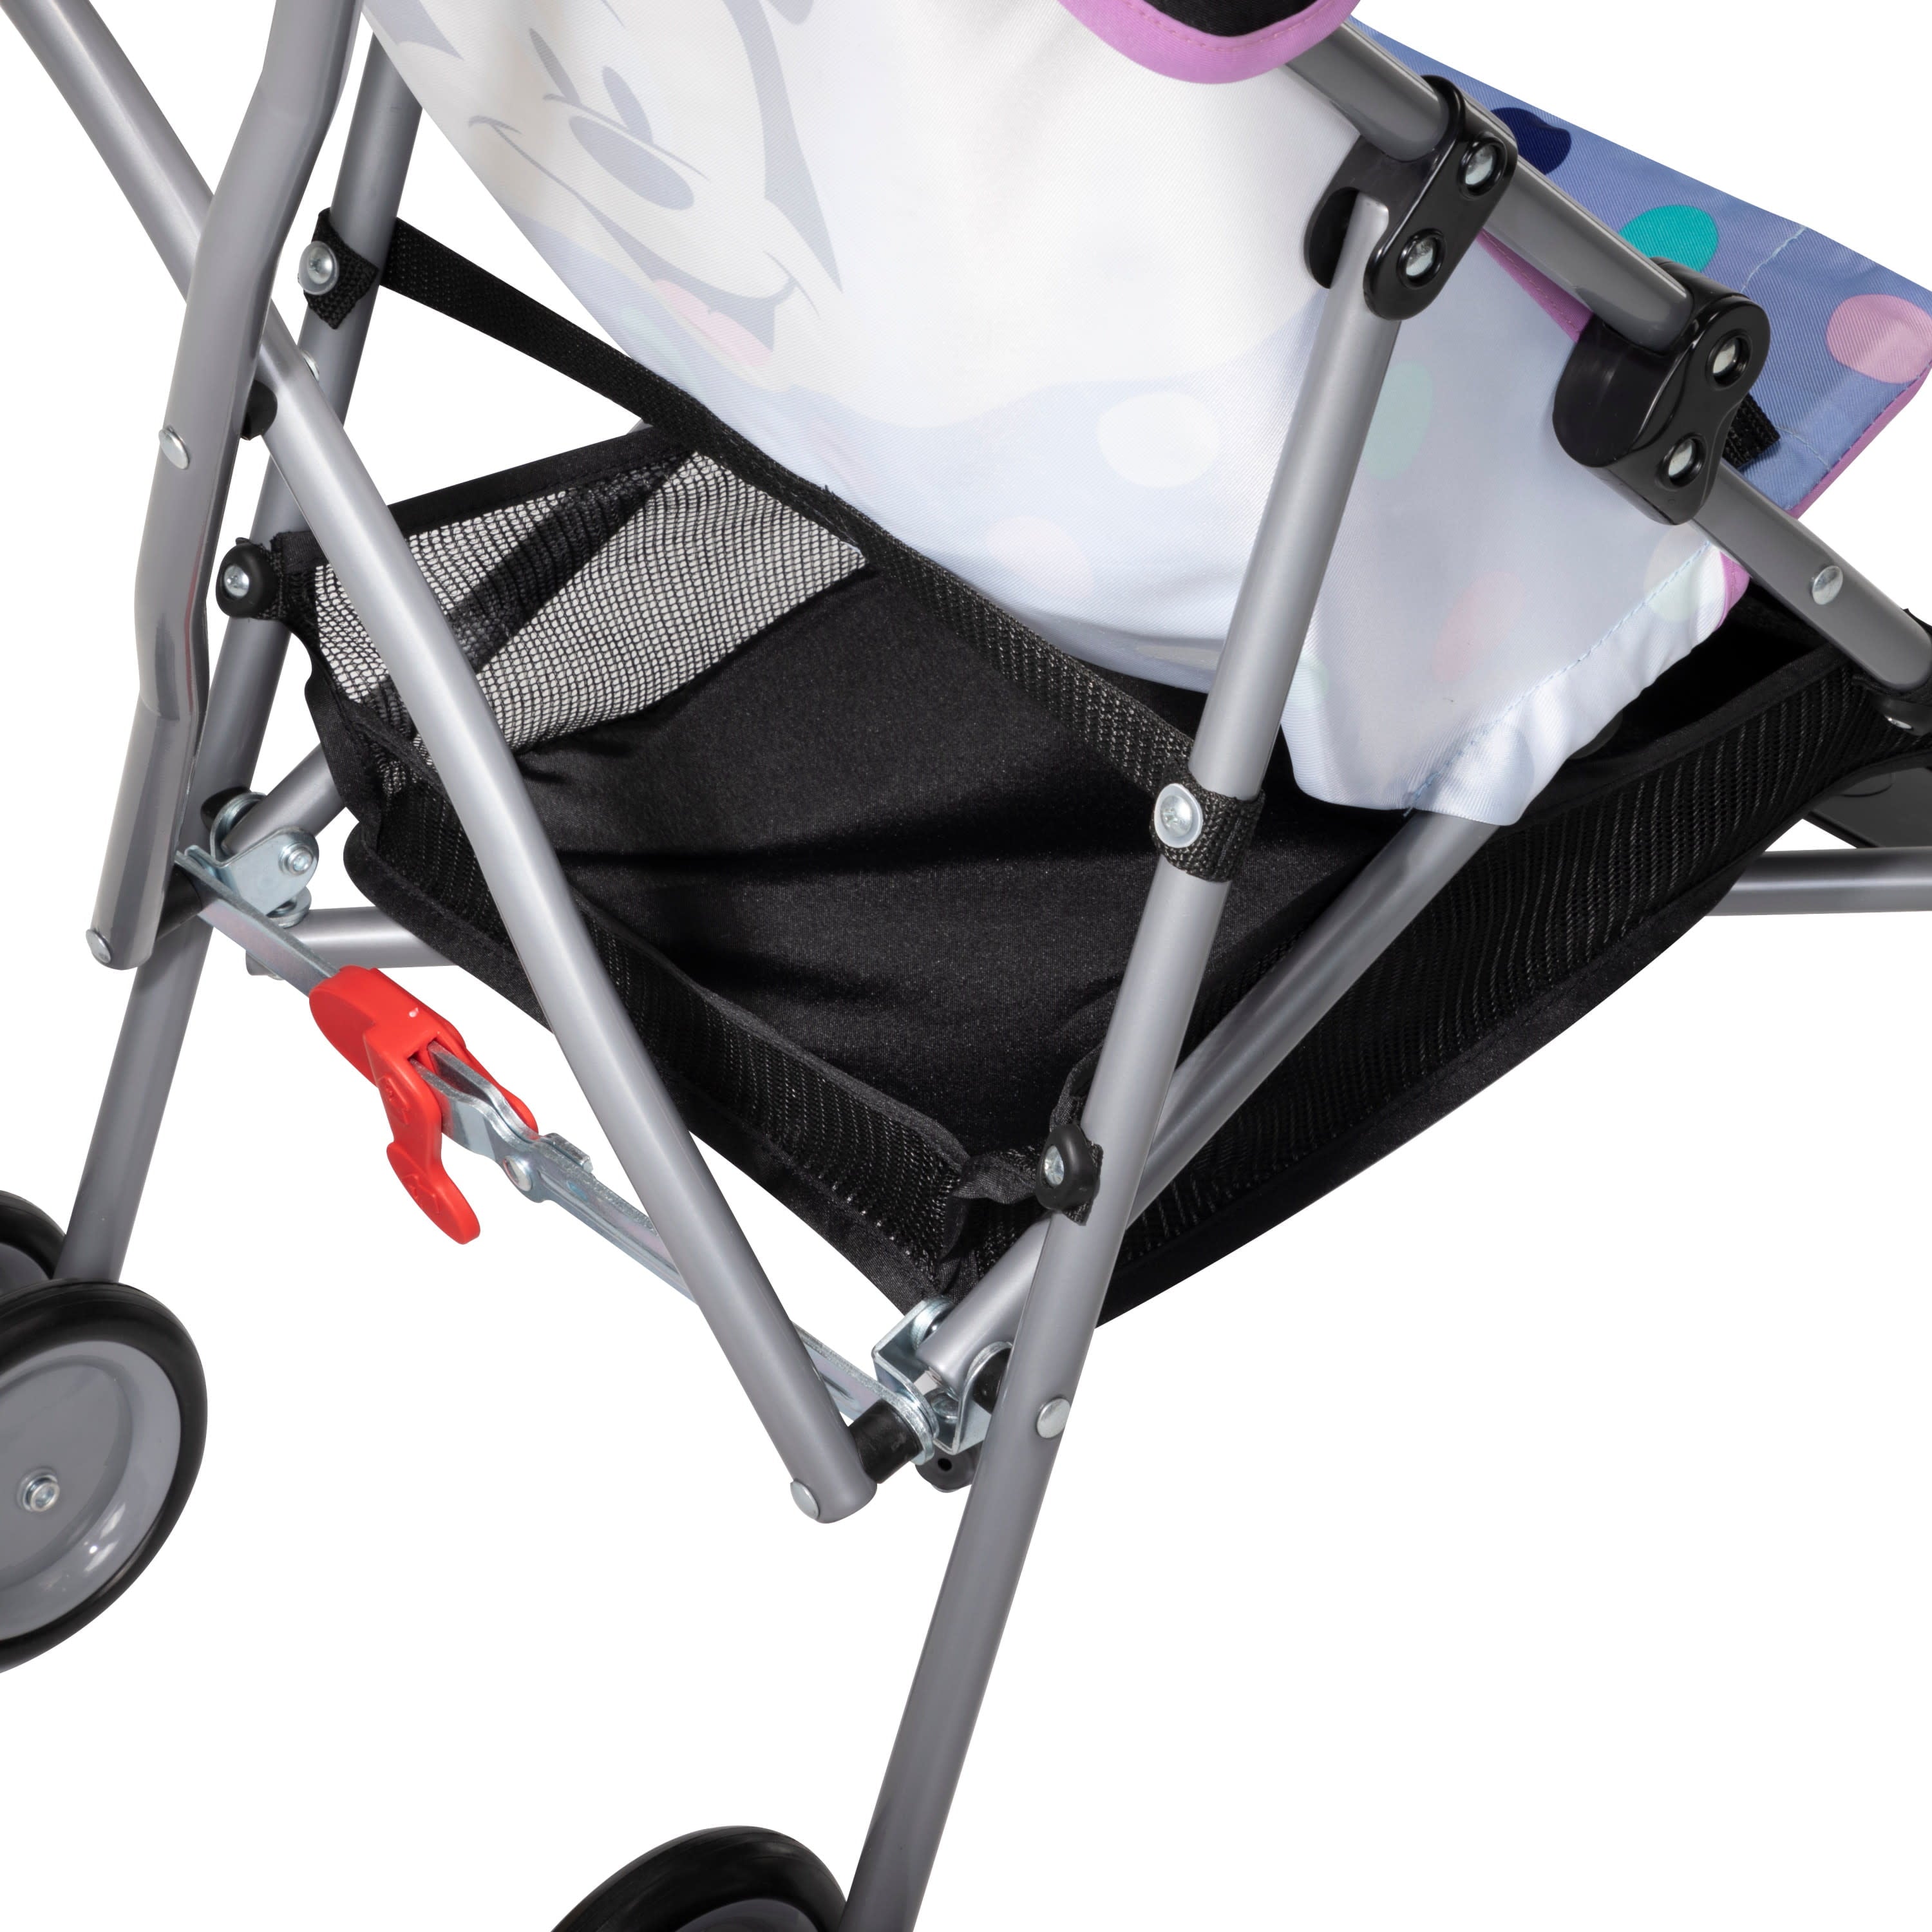 Disney Baby Character Umbrella Stroller, Minnie Play All Day